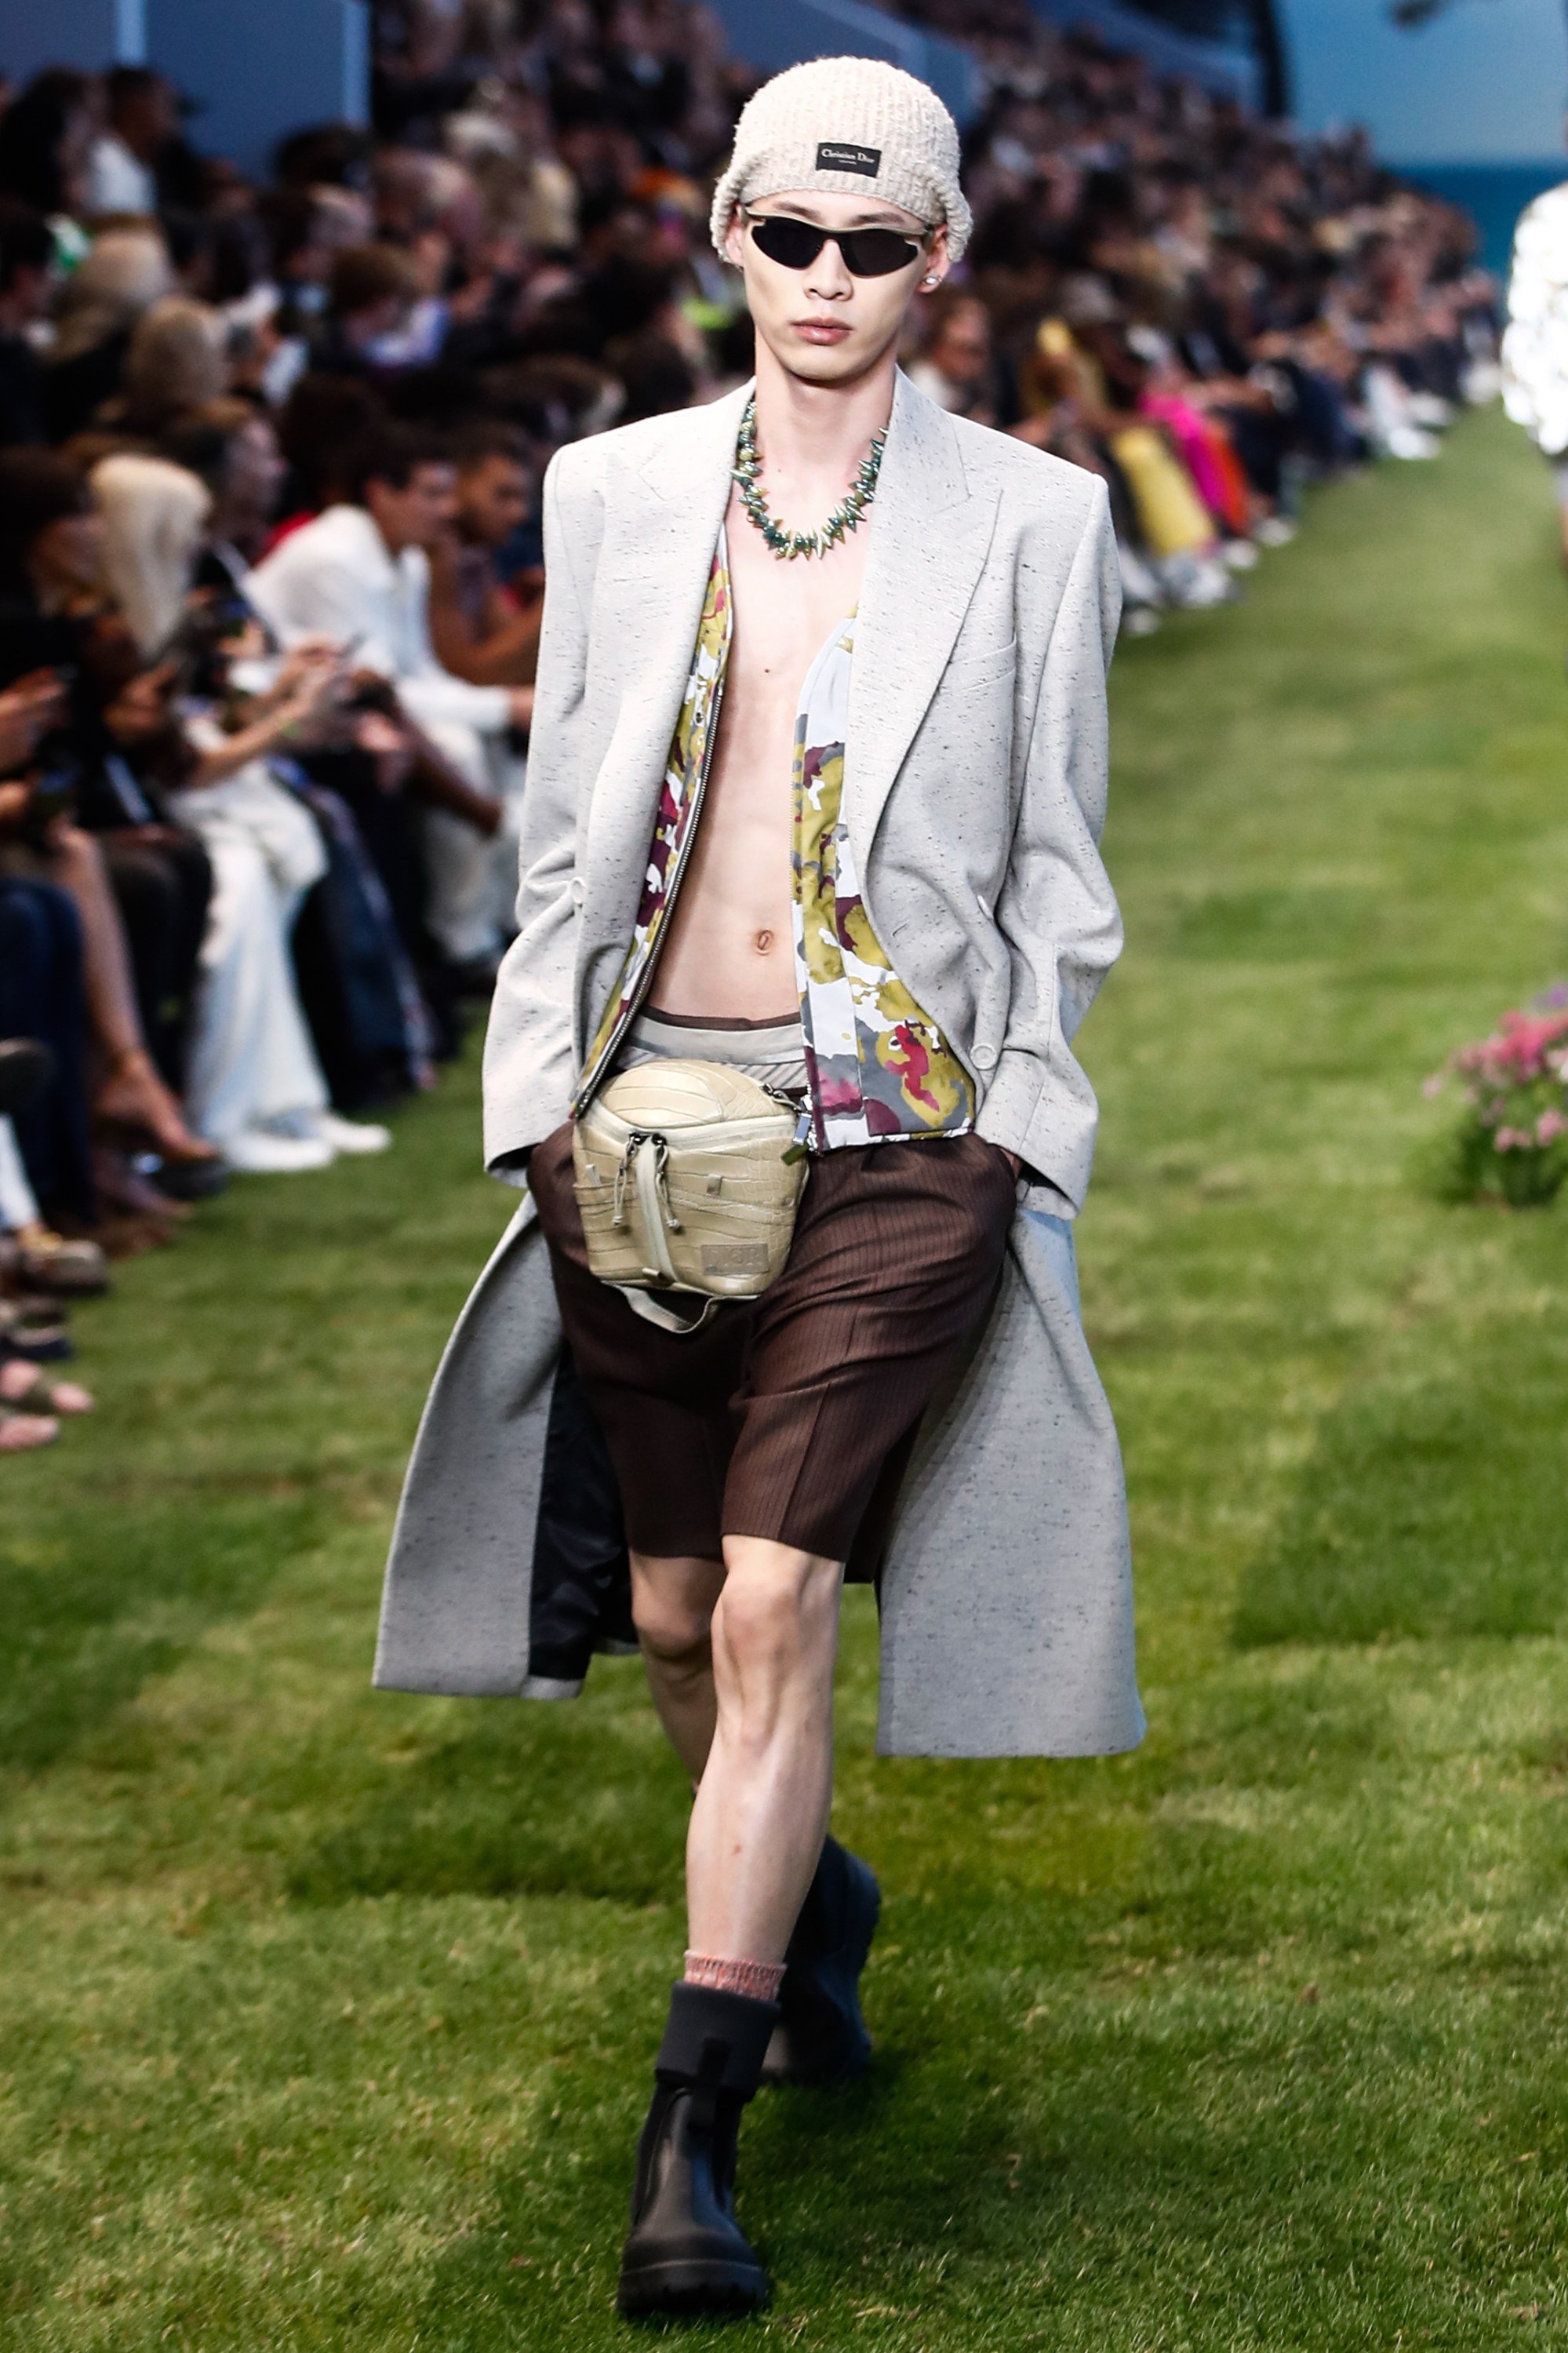 Dior Unveils Bold Kim Jones' Tailoring Creations for Summer 2022